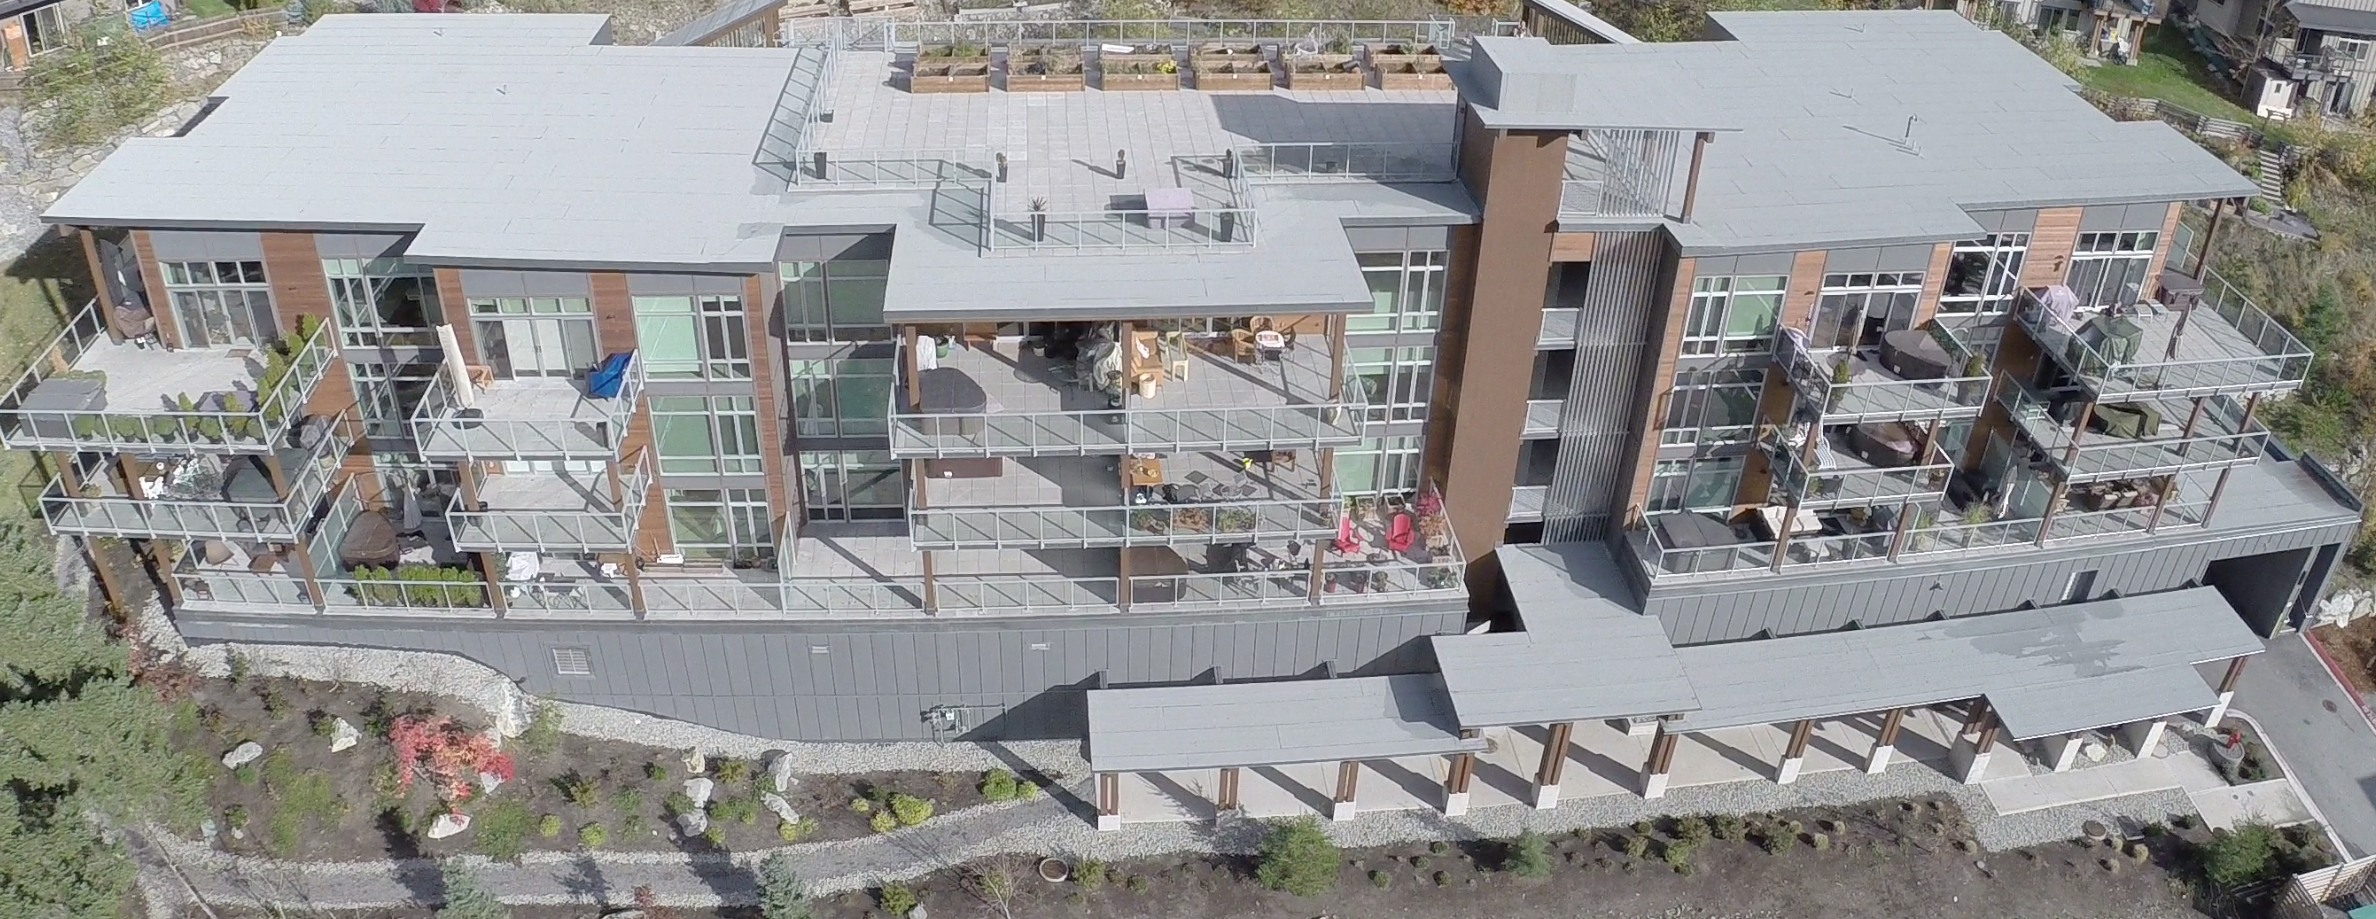 Daytime aerial drone view of Solana, a multi-family hybrid residential project, built with mass timber and light frame construction, including I-beams/I-joists and Laminated veneer lumber (LVL)